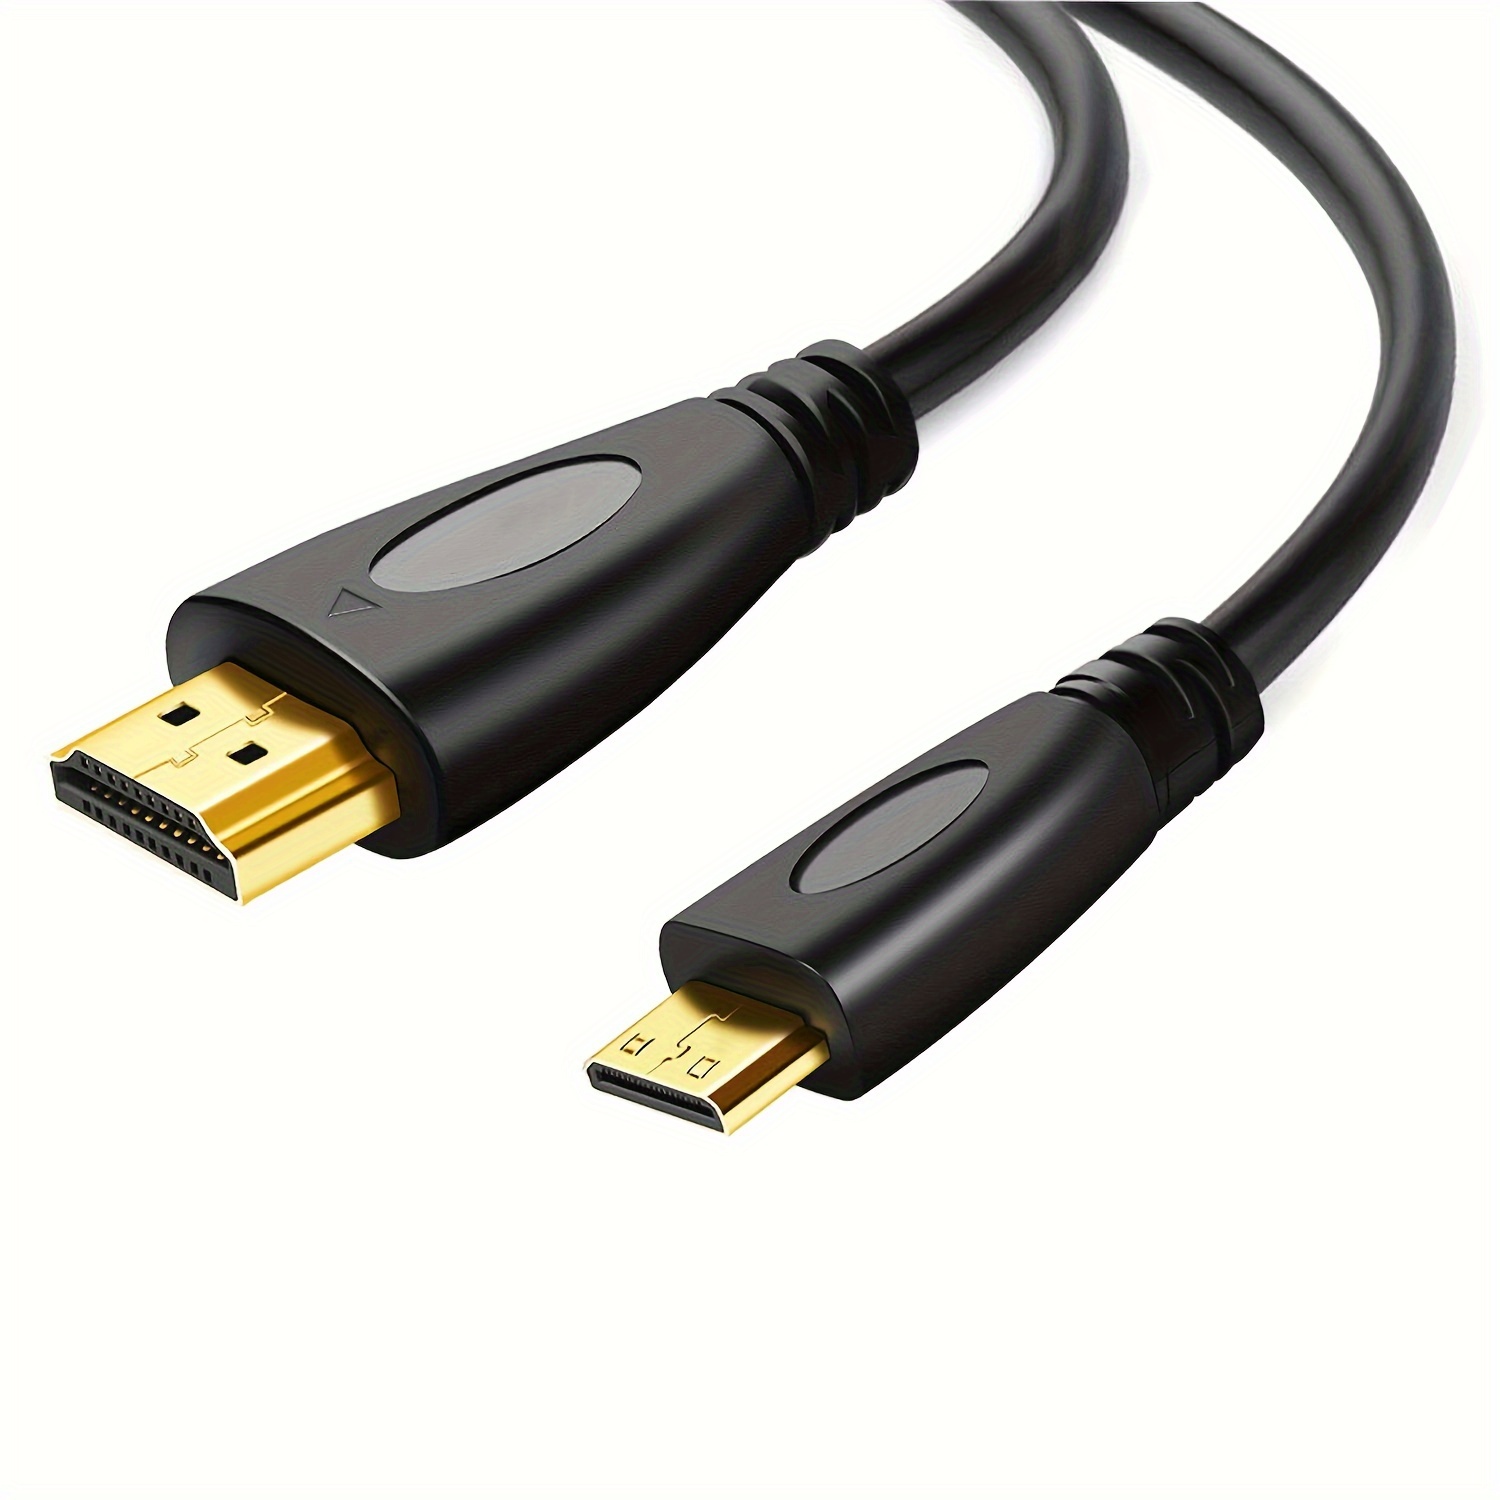 4K 1080P Mini Dp Thunderbolt to HDMI Cable 6FT 1.83m - China Mini  Displayport to Hdmi Cable and Thunderbolt to Hdmi Cable price